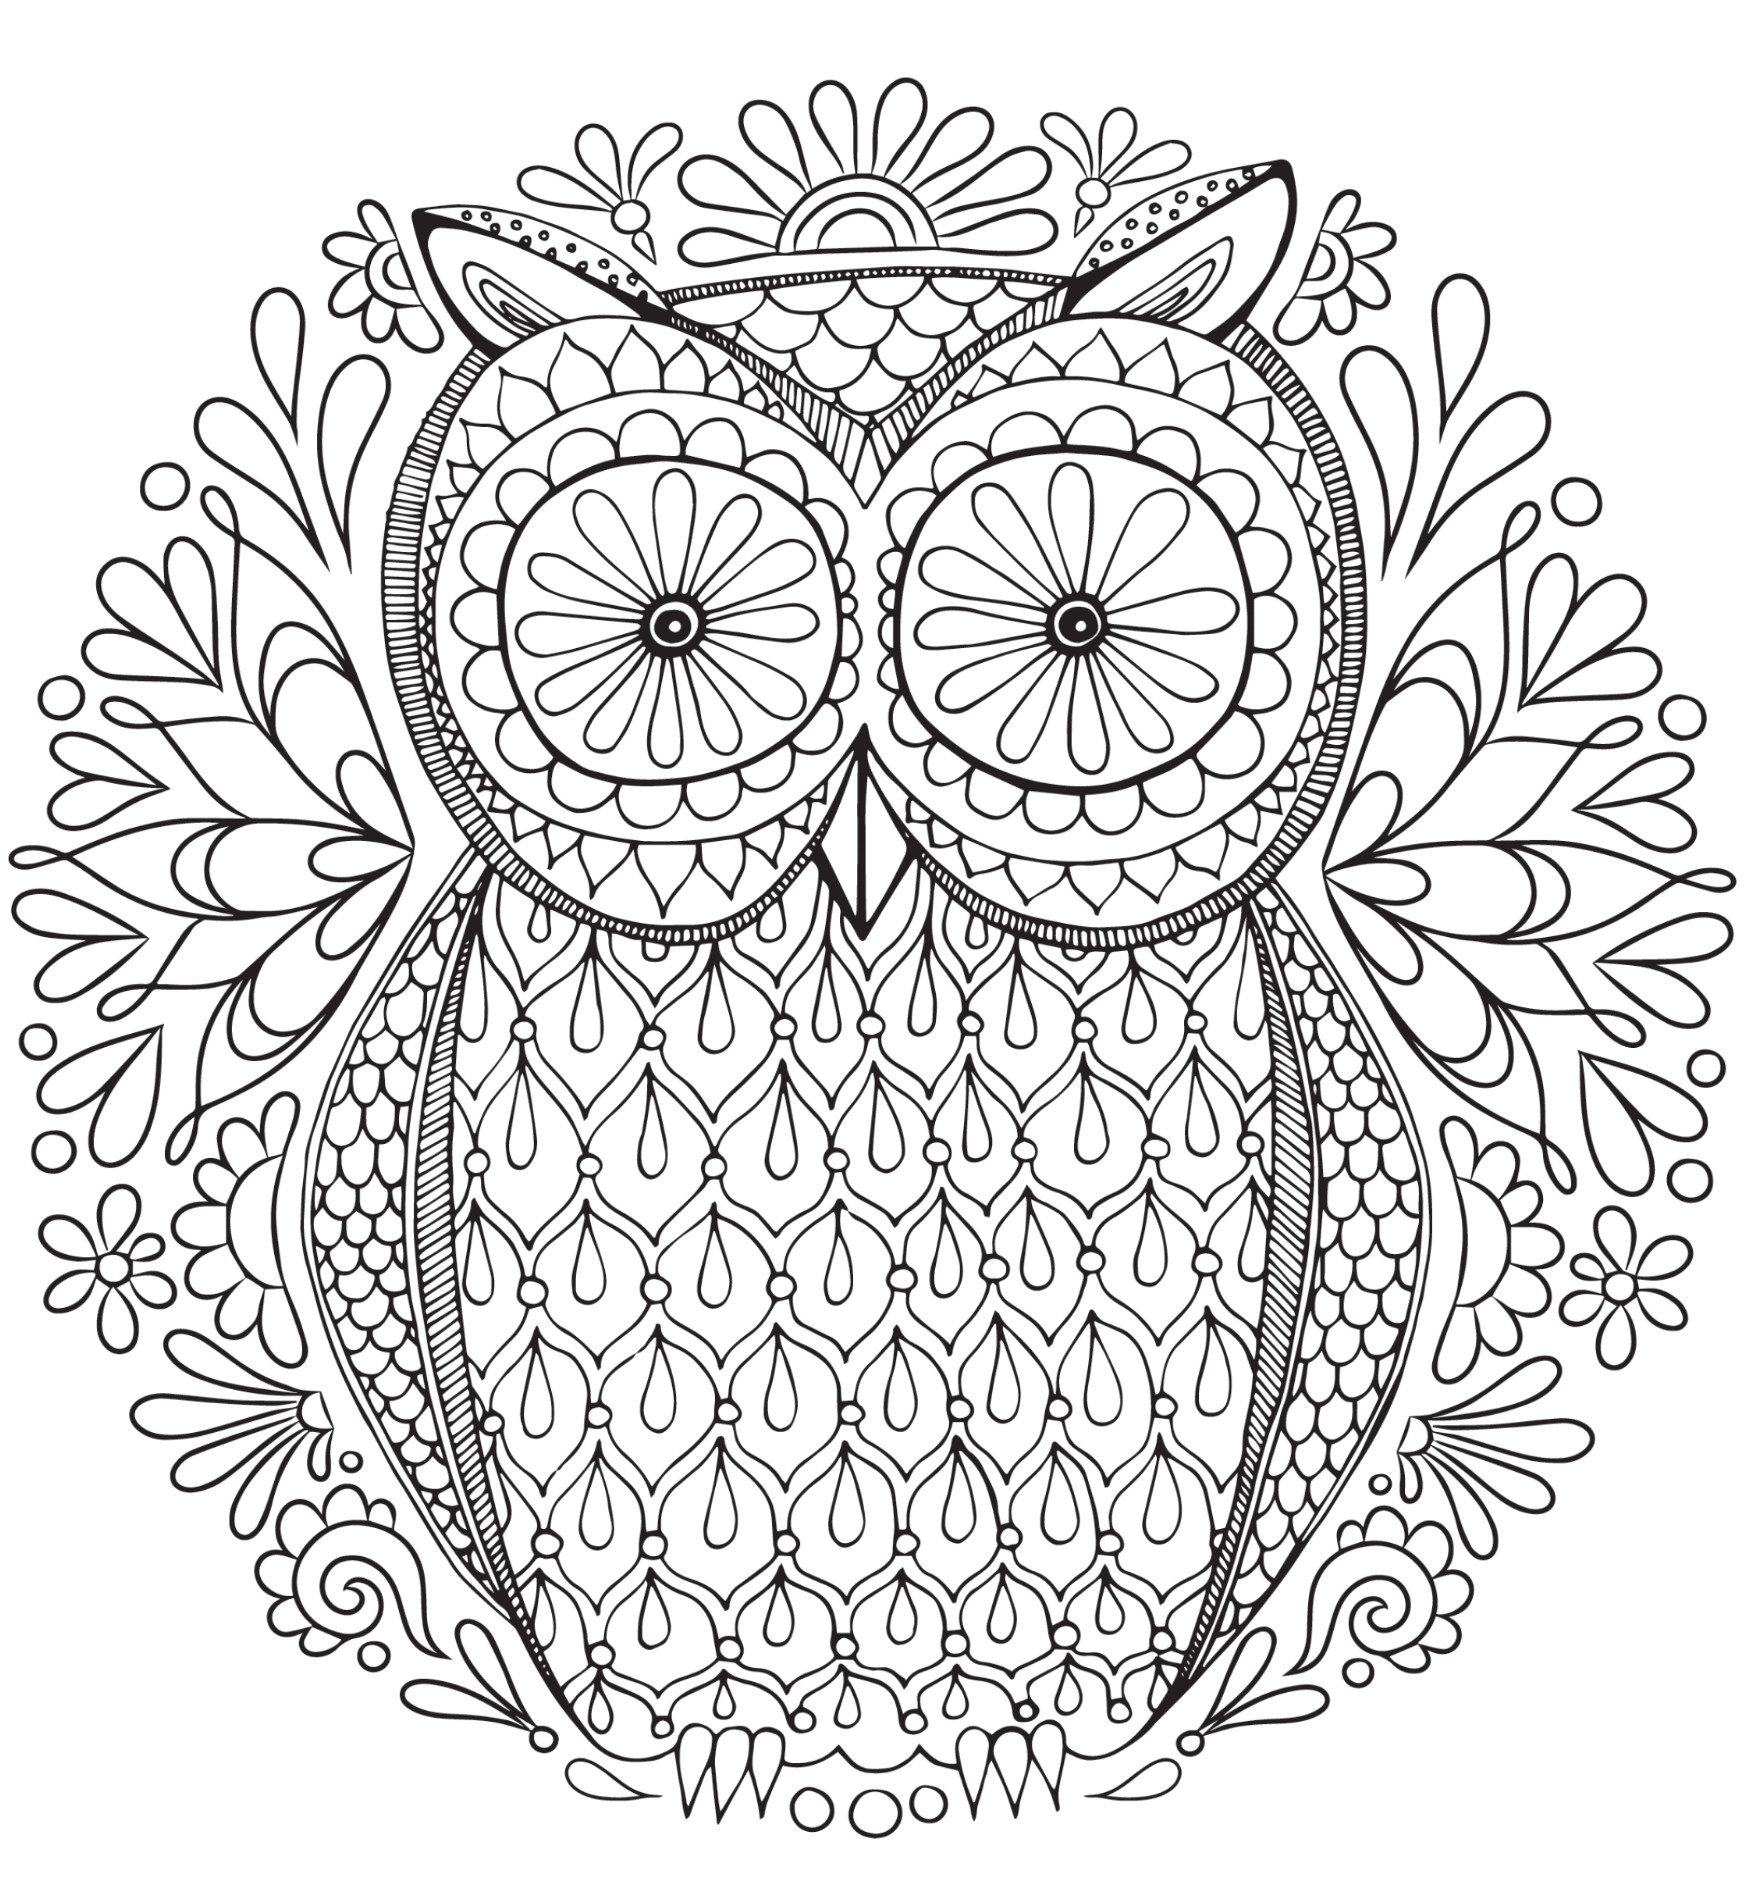 Free Coloring Pages For Adults Printable
 20 Free Adult Colouring Pages The Organised Housewife